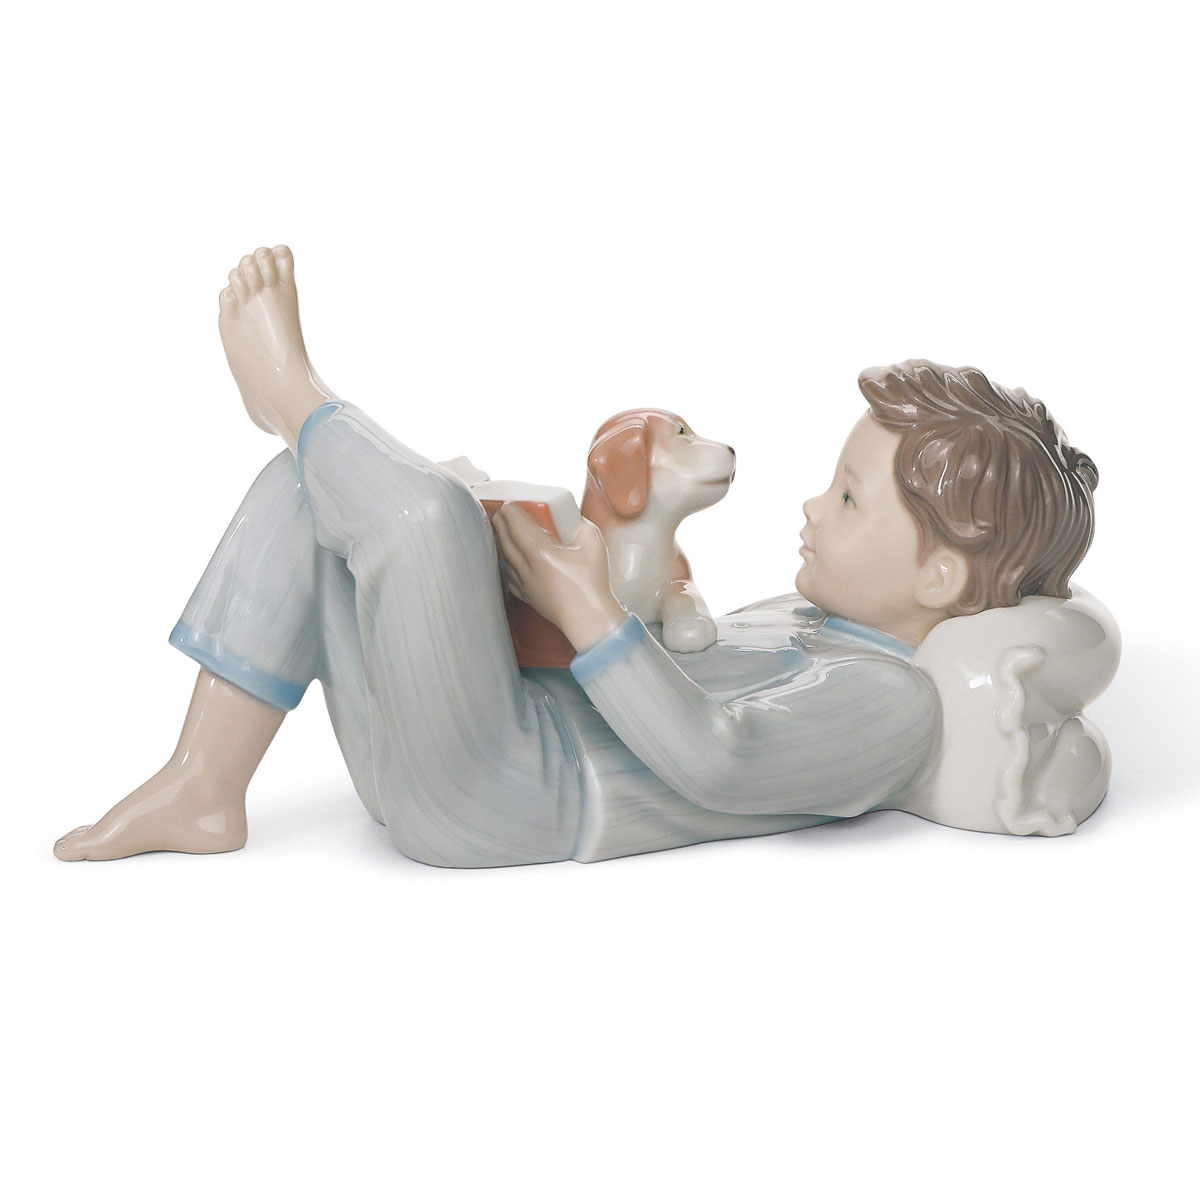 Lladro Classic Sculpture, Shall I Read You A Story? Boy Figurine